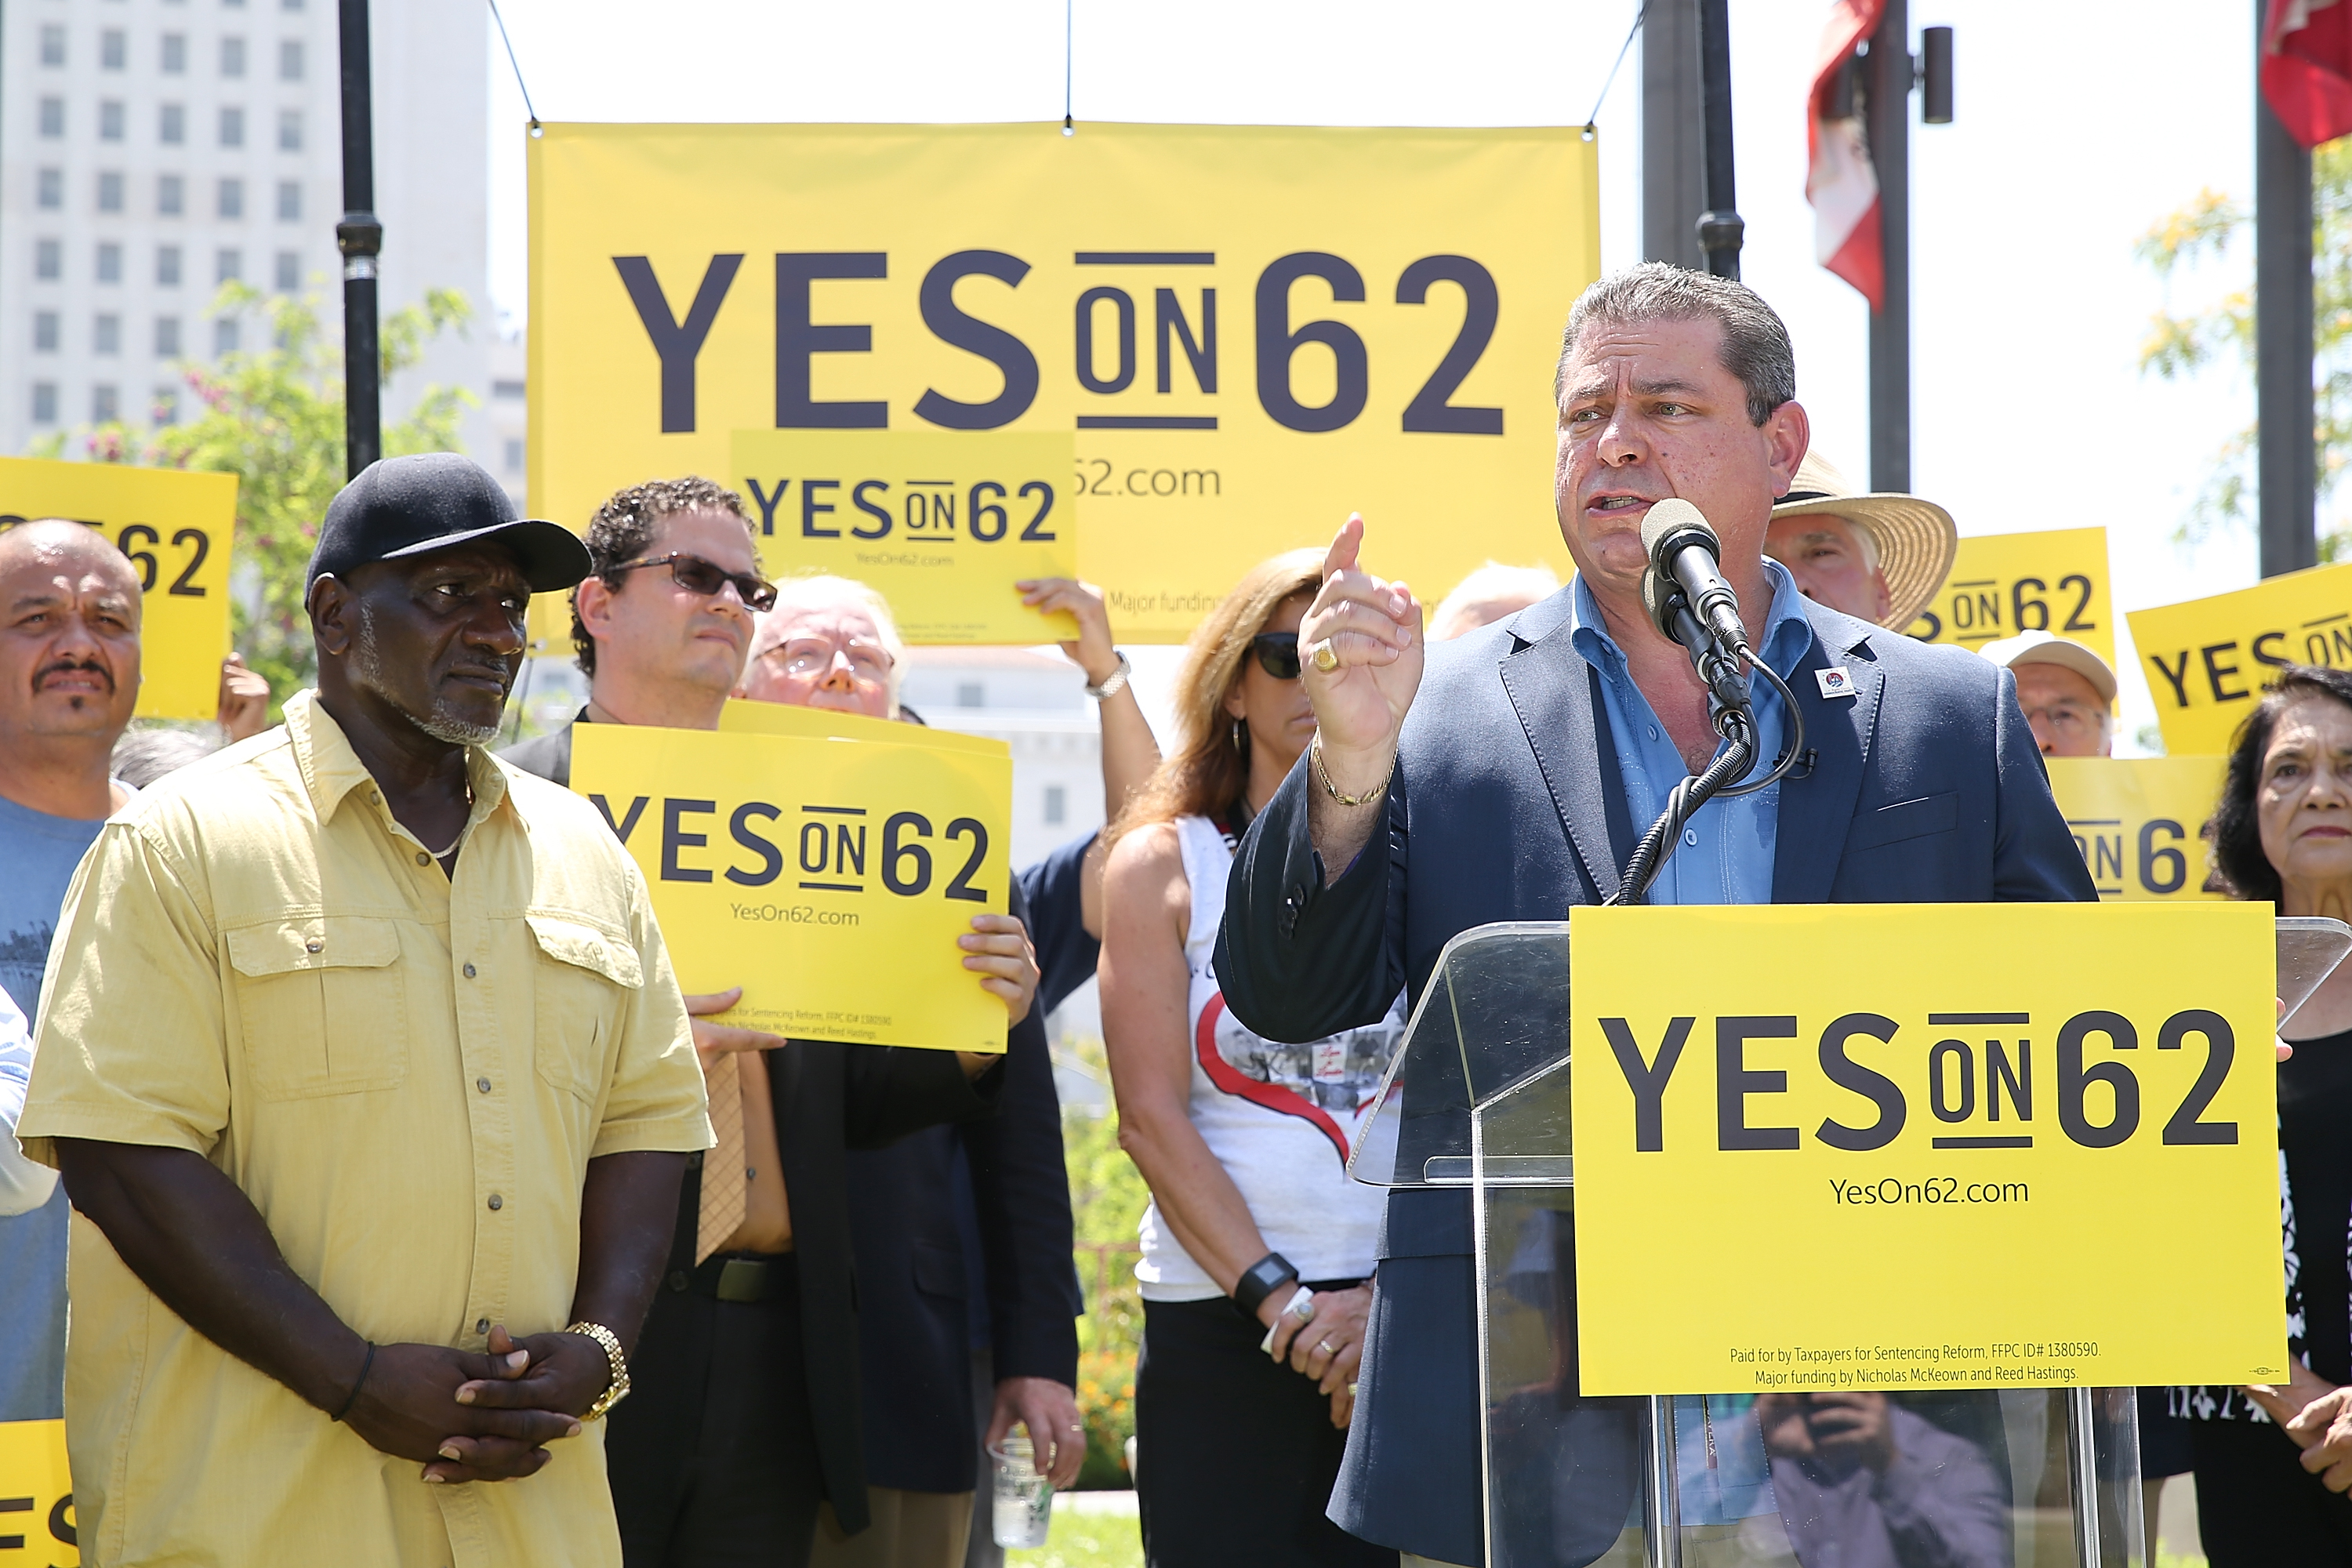 Chairman of the Los Angeles County Democratic Party Eric Bauman (R) speaks onstage during the Yes on Prop 62 Coalition Announcement at Los Angeles Grand Park on July 14, 2016 in Los Angeles, California. (Phillip Faraone/Getty Images for Yes on Prop 62)